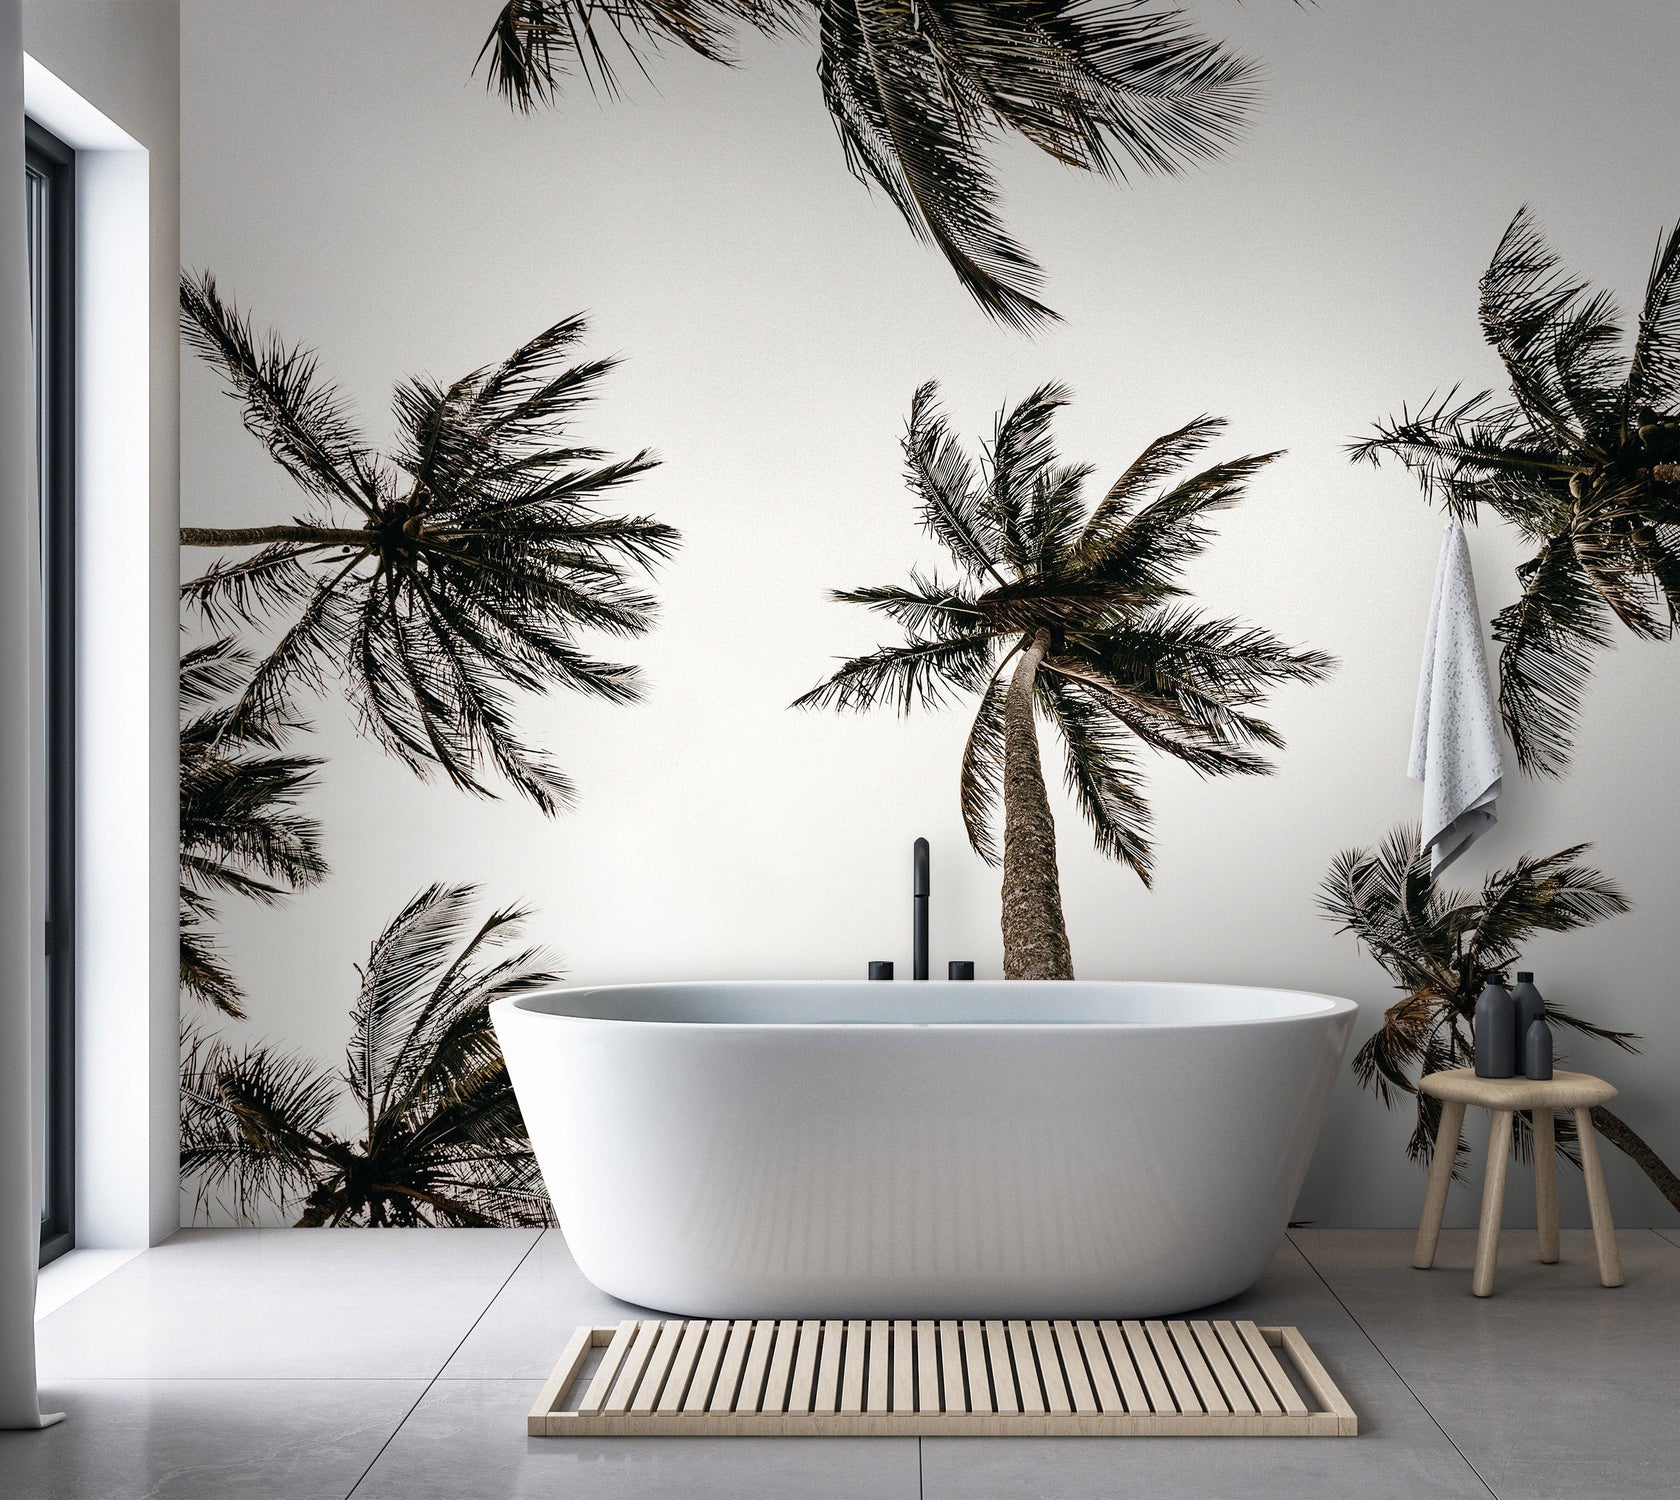 Peel & Stick Tropical Wall Mural - Palm Trees - Removable Wall Decals-Tiptophomedecor